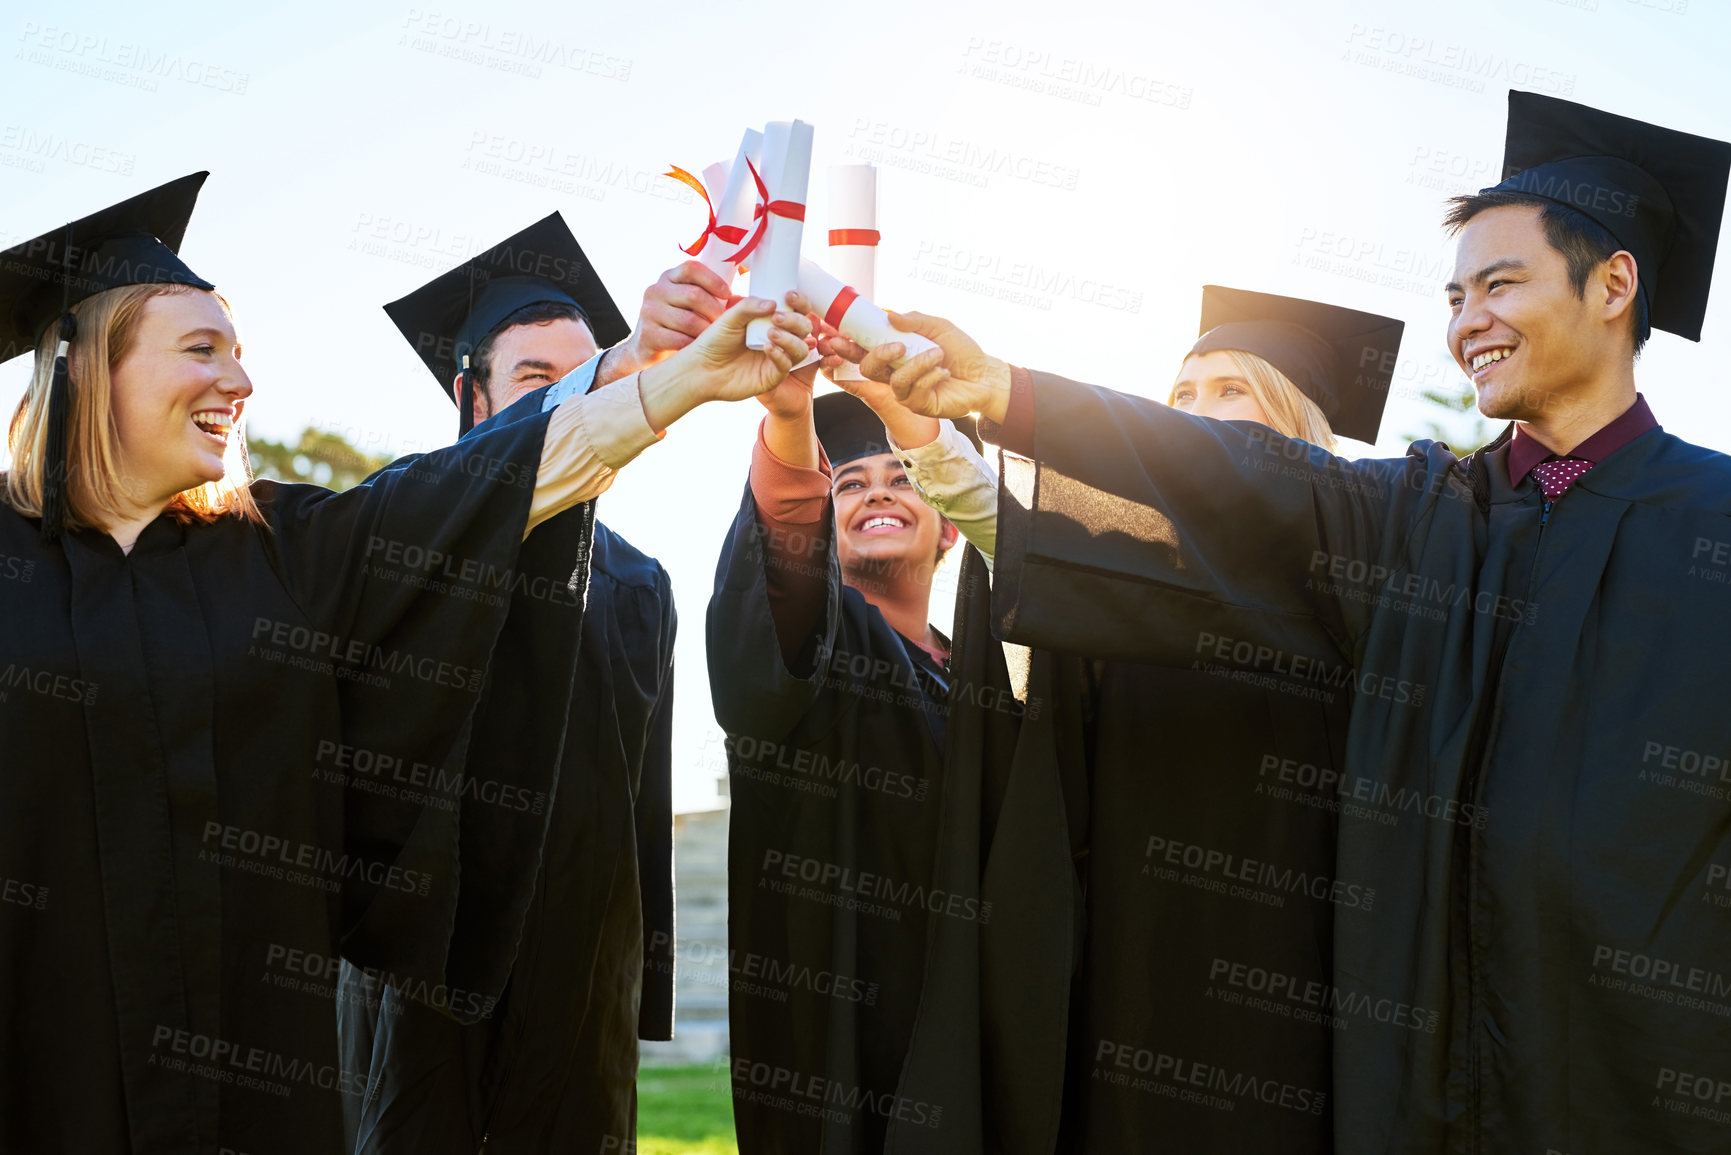 Buy stock photo Shot of a group of students holding their diplomas together on graduation day